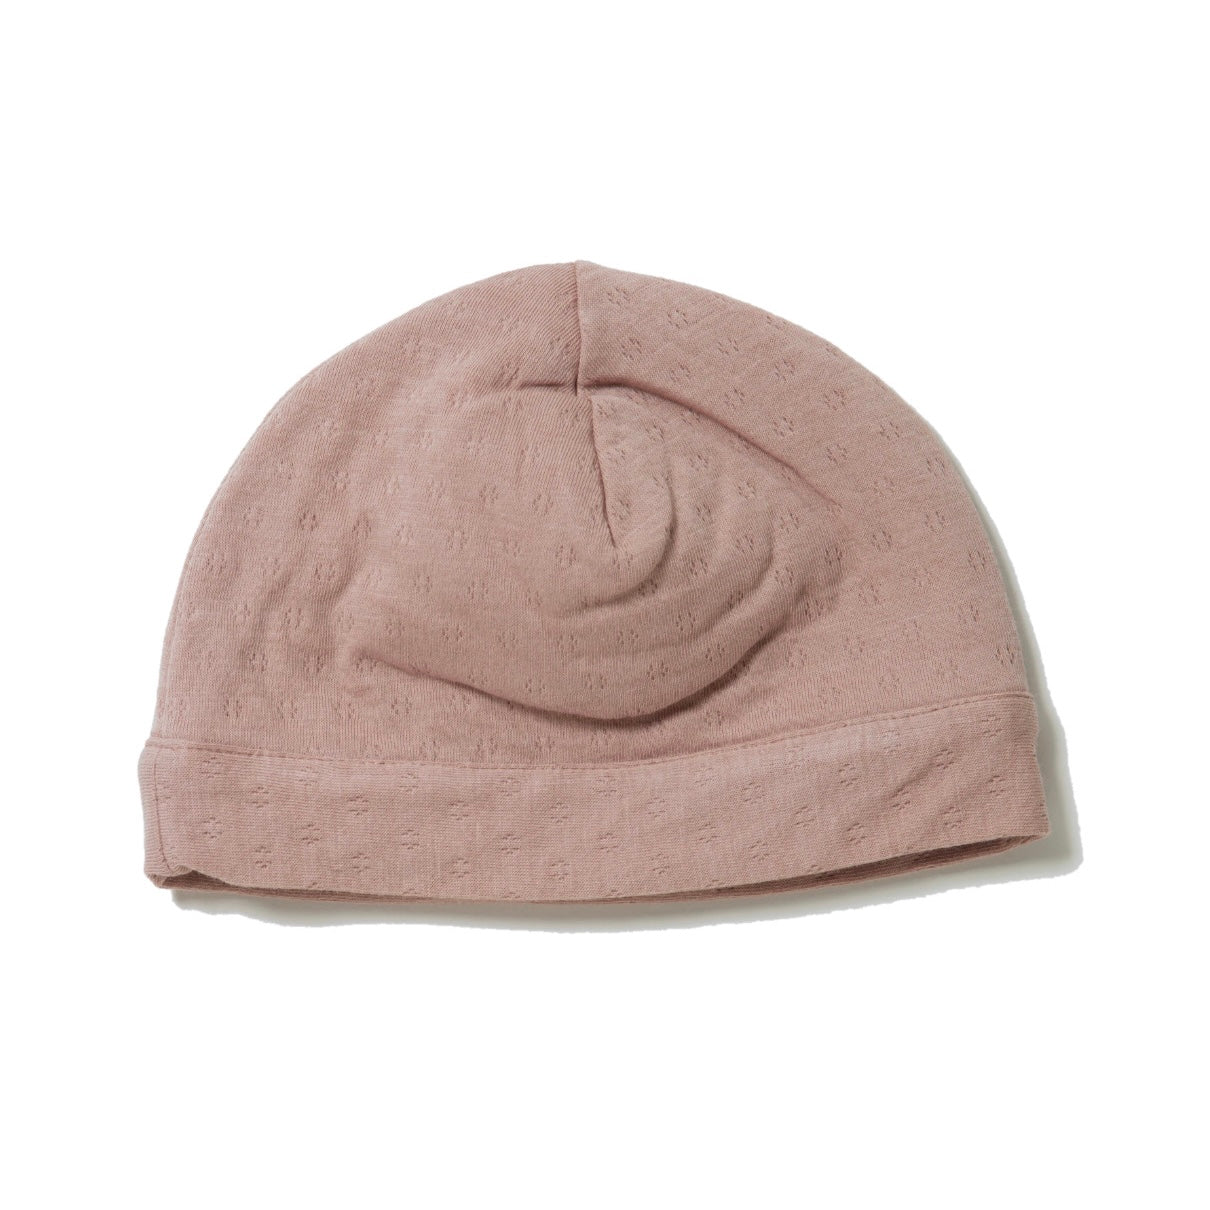 rose color pointelle double layered skull cap for newborn.  100% organic cotton.